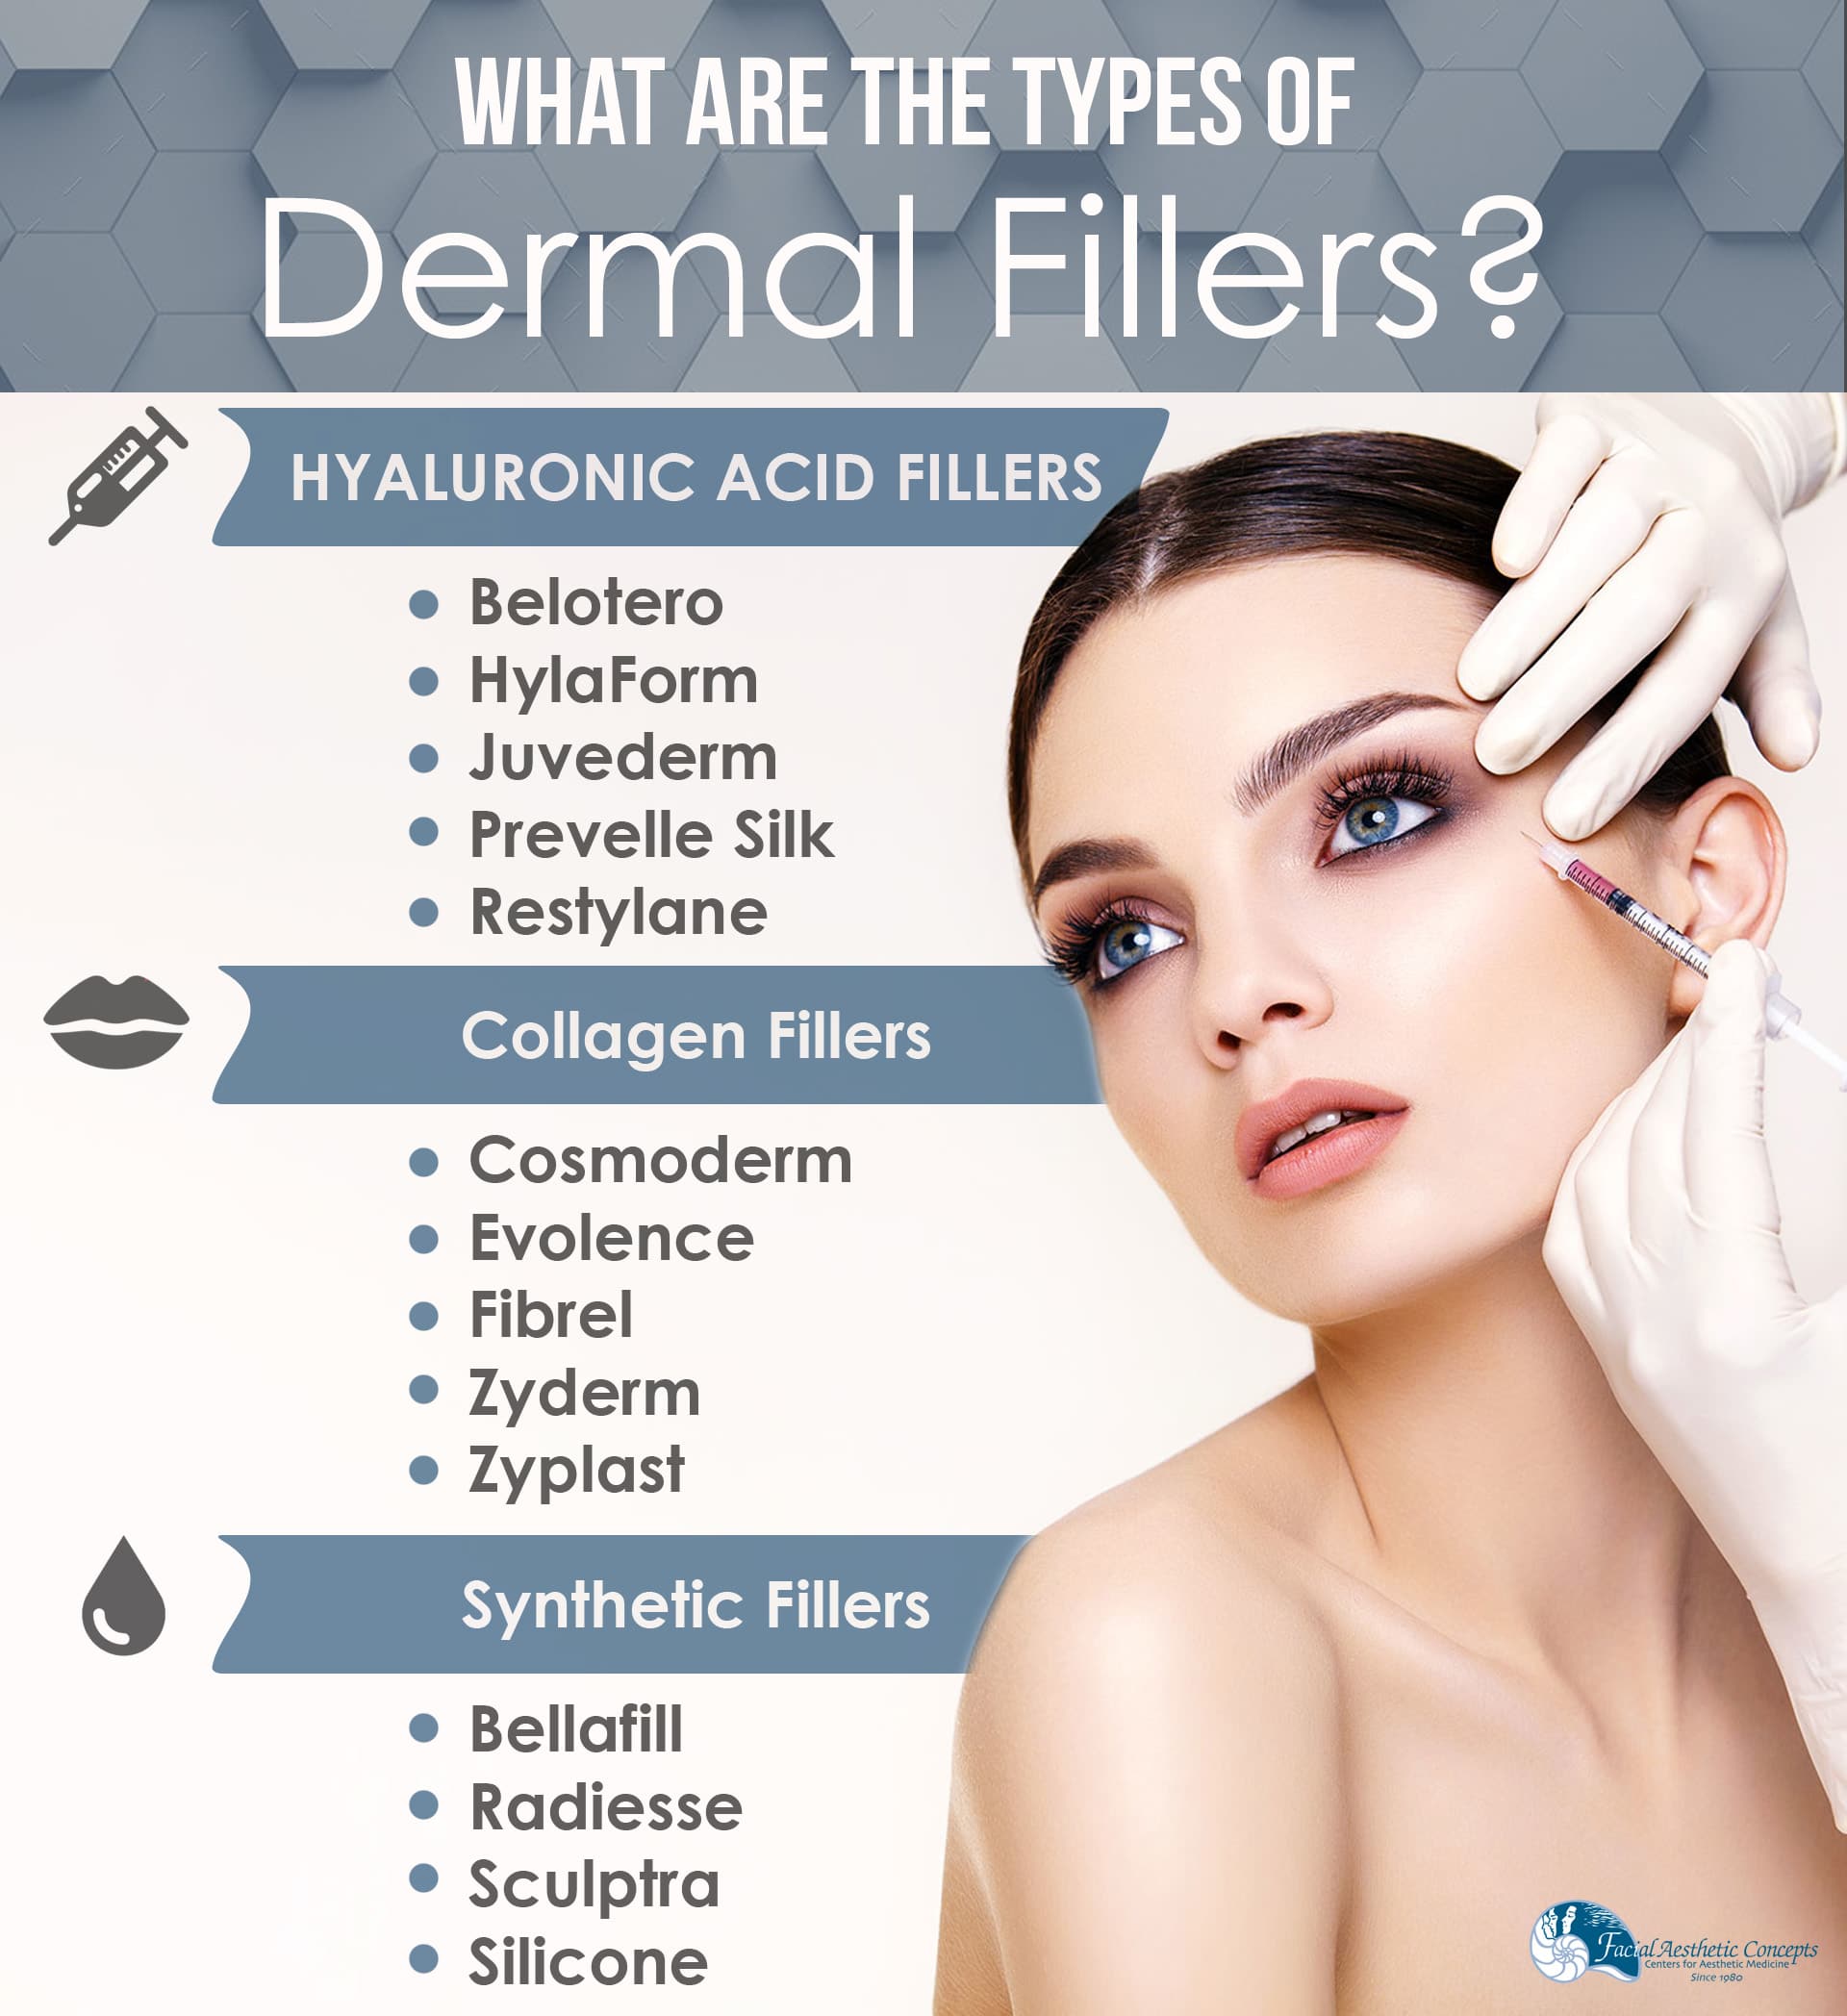 What Are the Types of Dermal Fillers Infographic